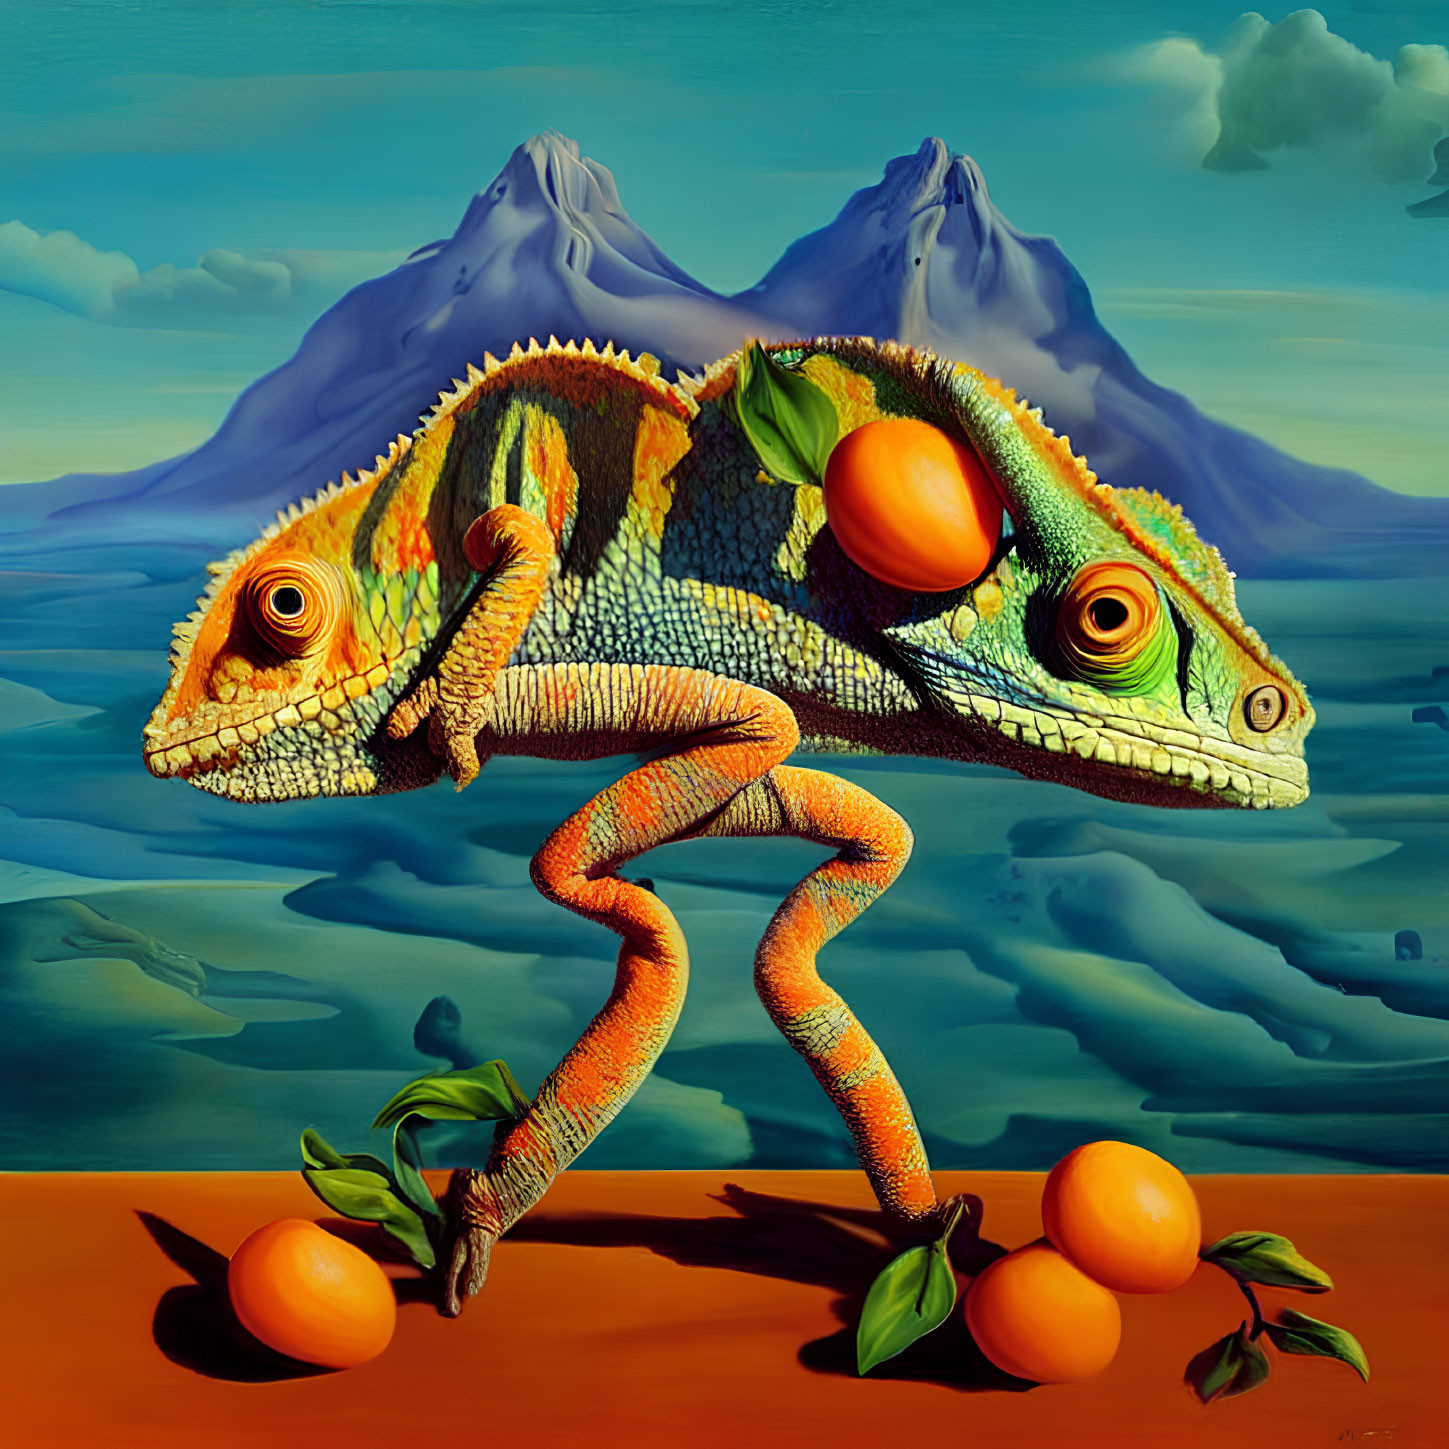 Surrealist painting: Chameleon with human-like legs among oranges, mountains, and sea